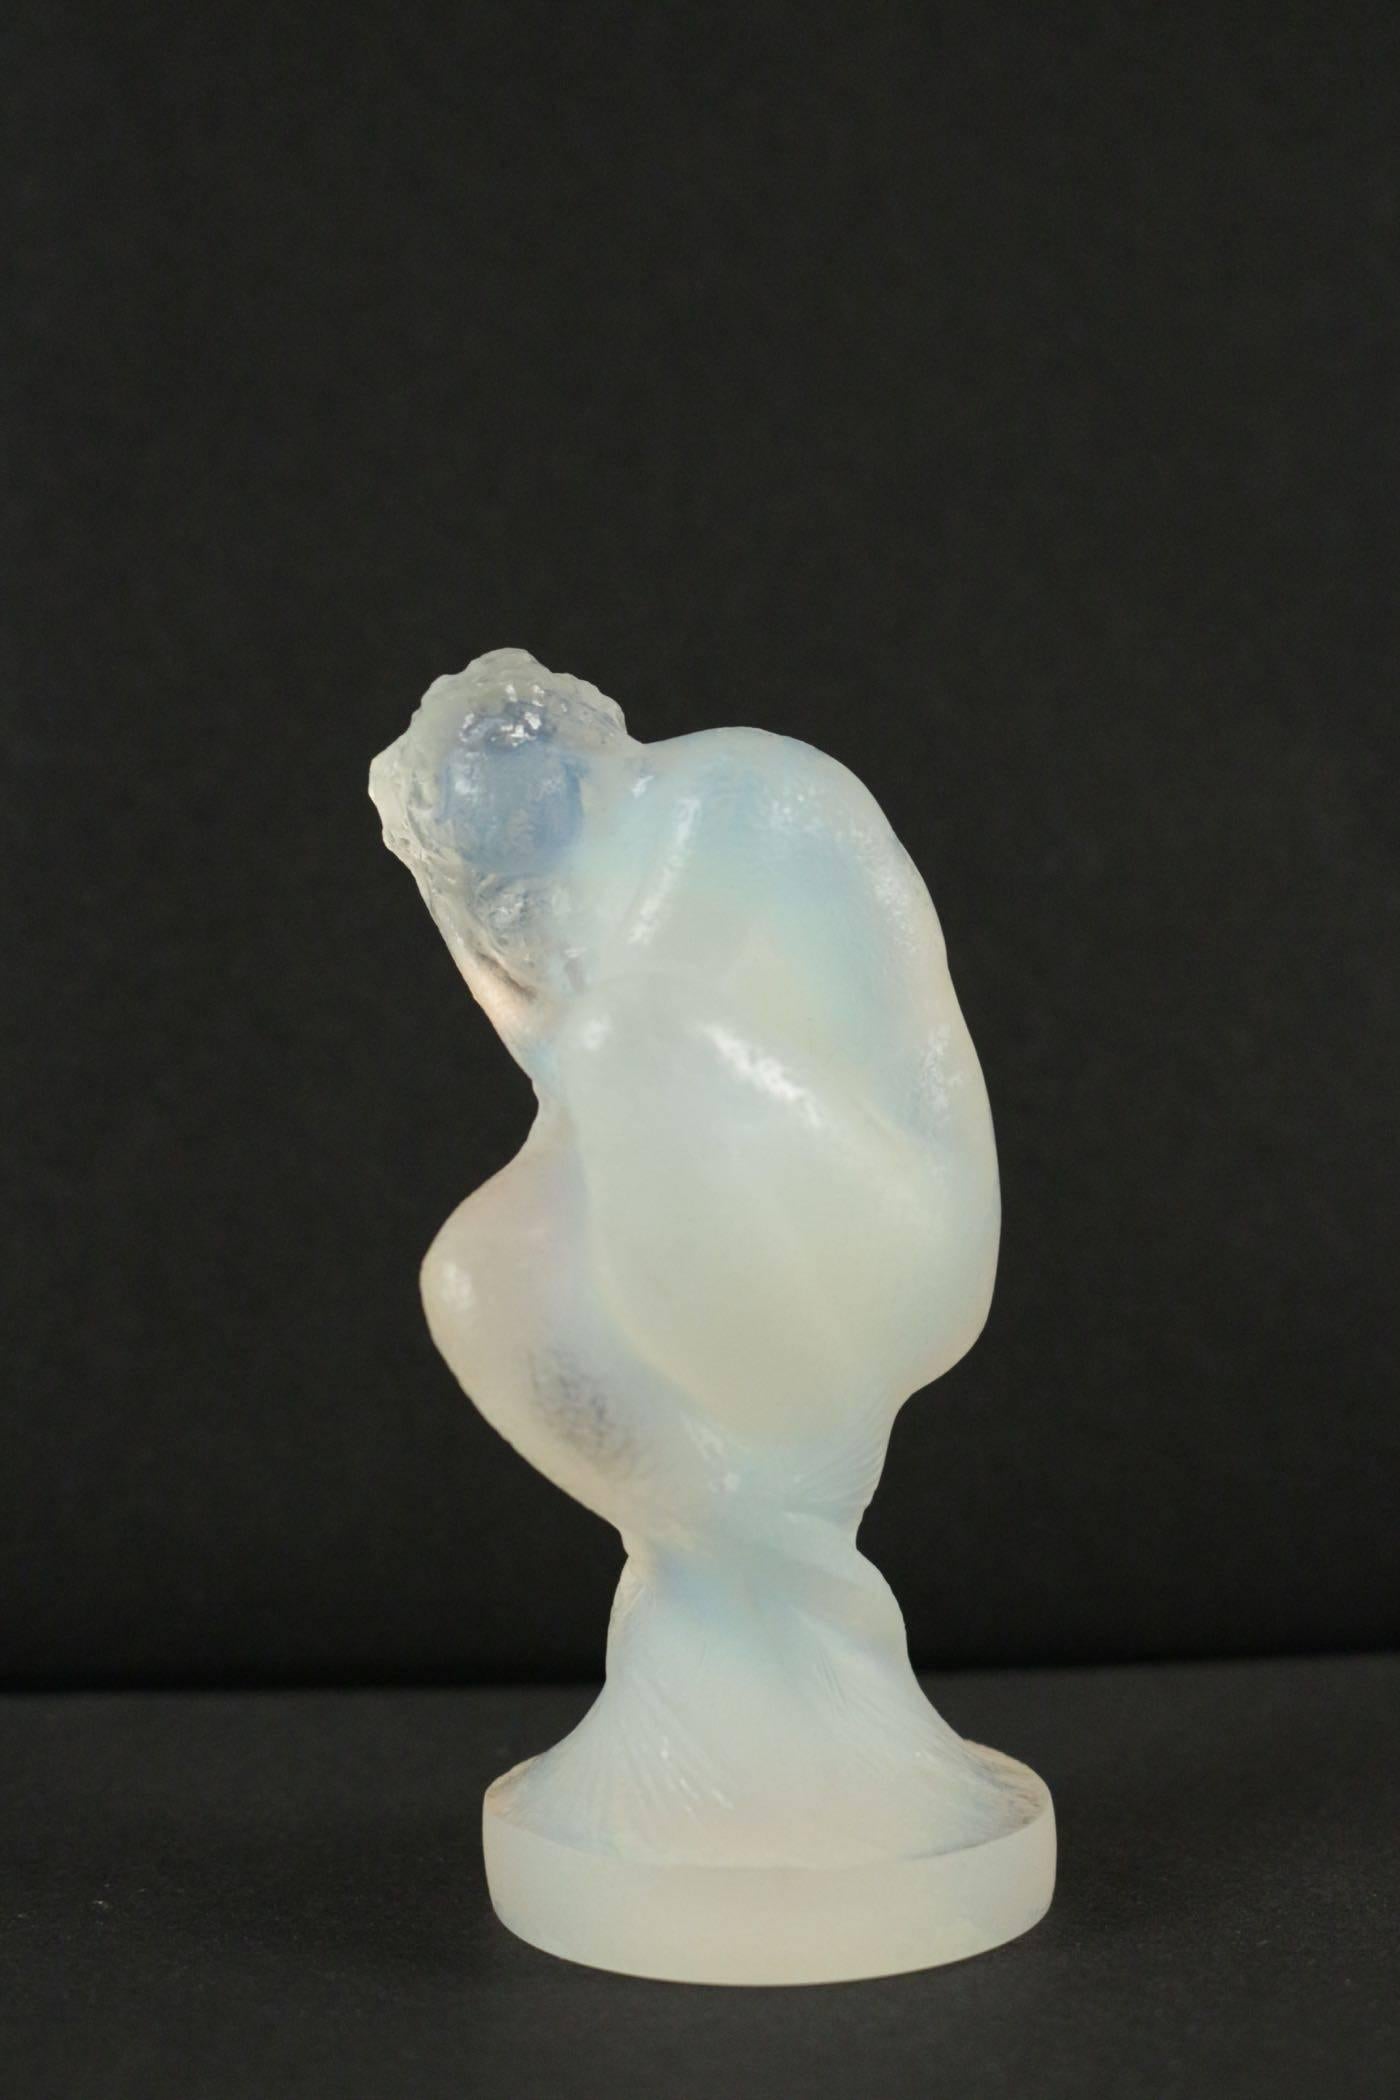 Opalescent glass crouching mythical mermaid type female figure holding a shell to one ear
Small statuette, model created in 1920 opalescent, moulded-pressed glass, model “Sirène”. Signed “R.Lalique France”. Model created in 1920. Measure: H 4 in